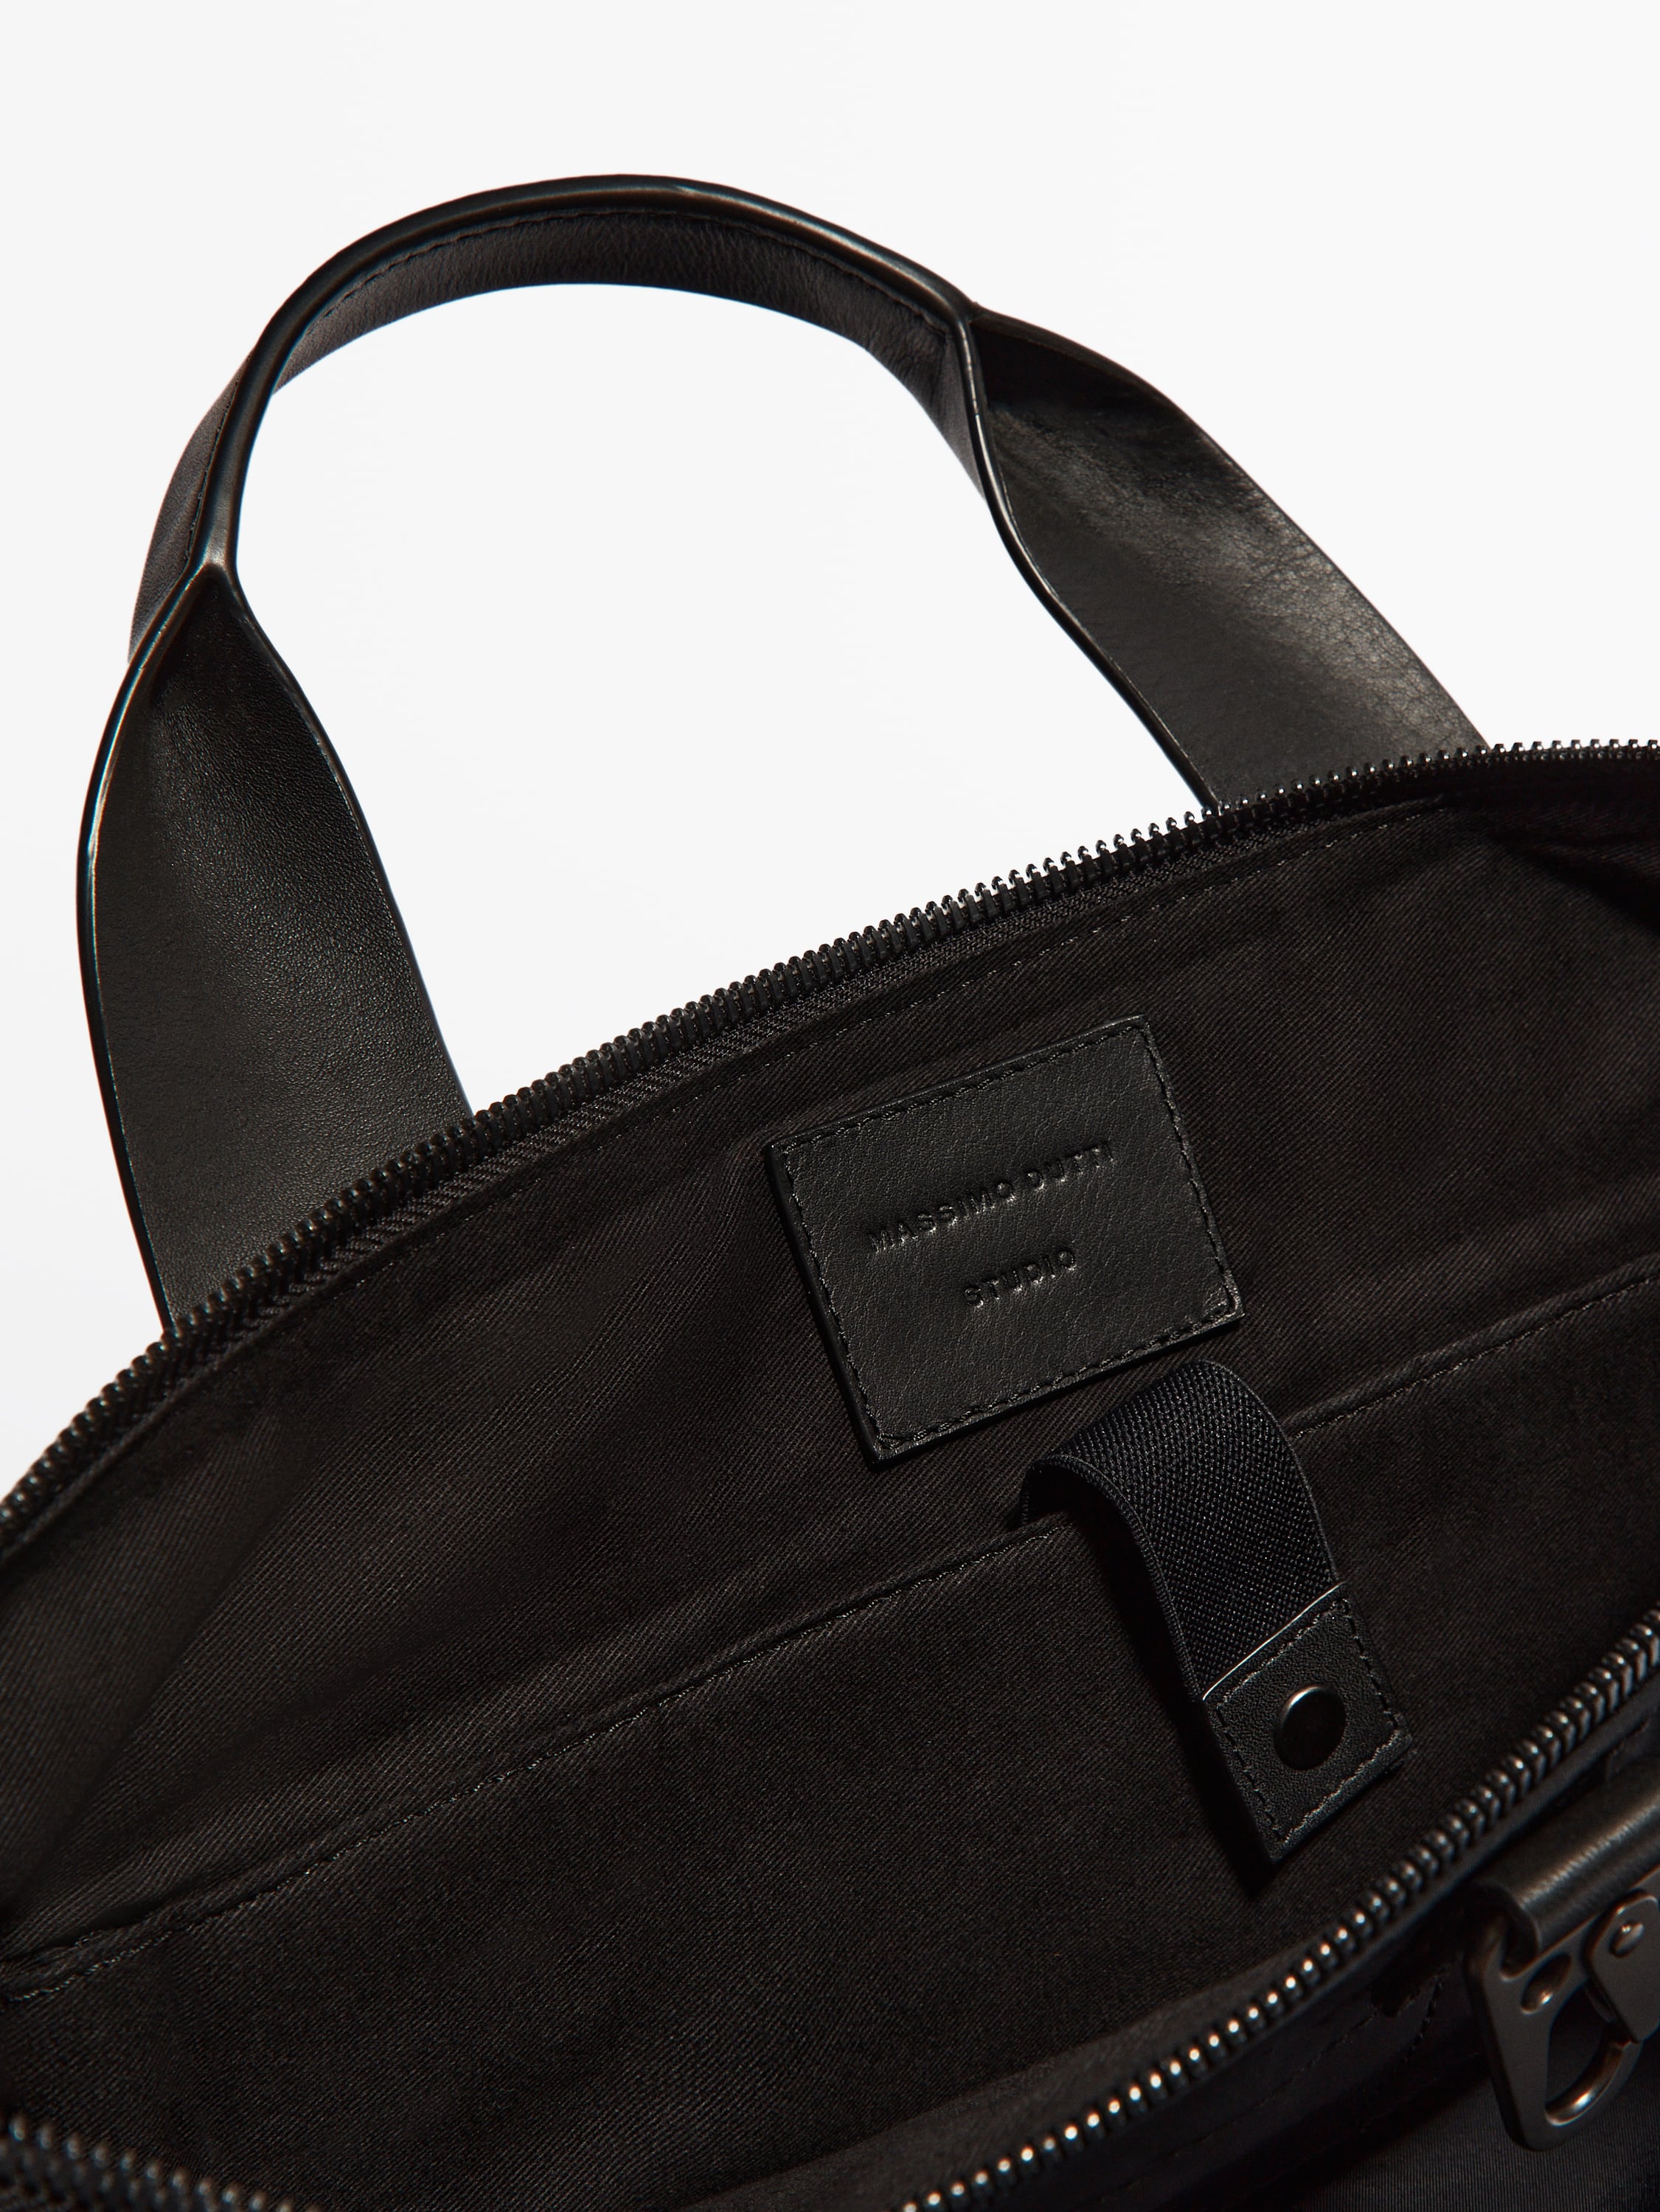 Contrast nylon tote bag with leather details - Studio